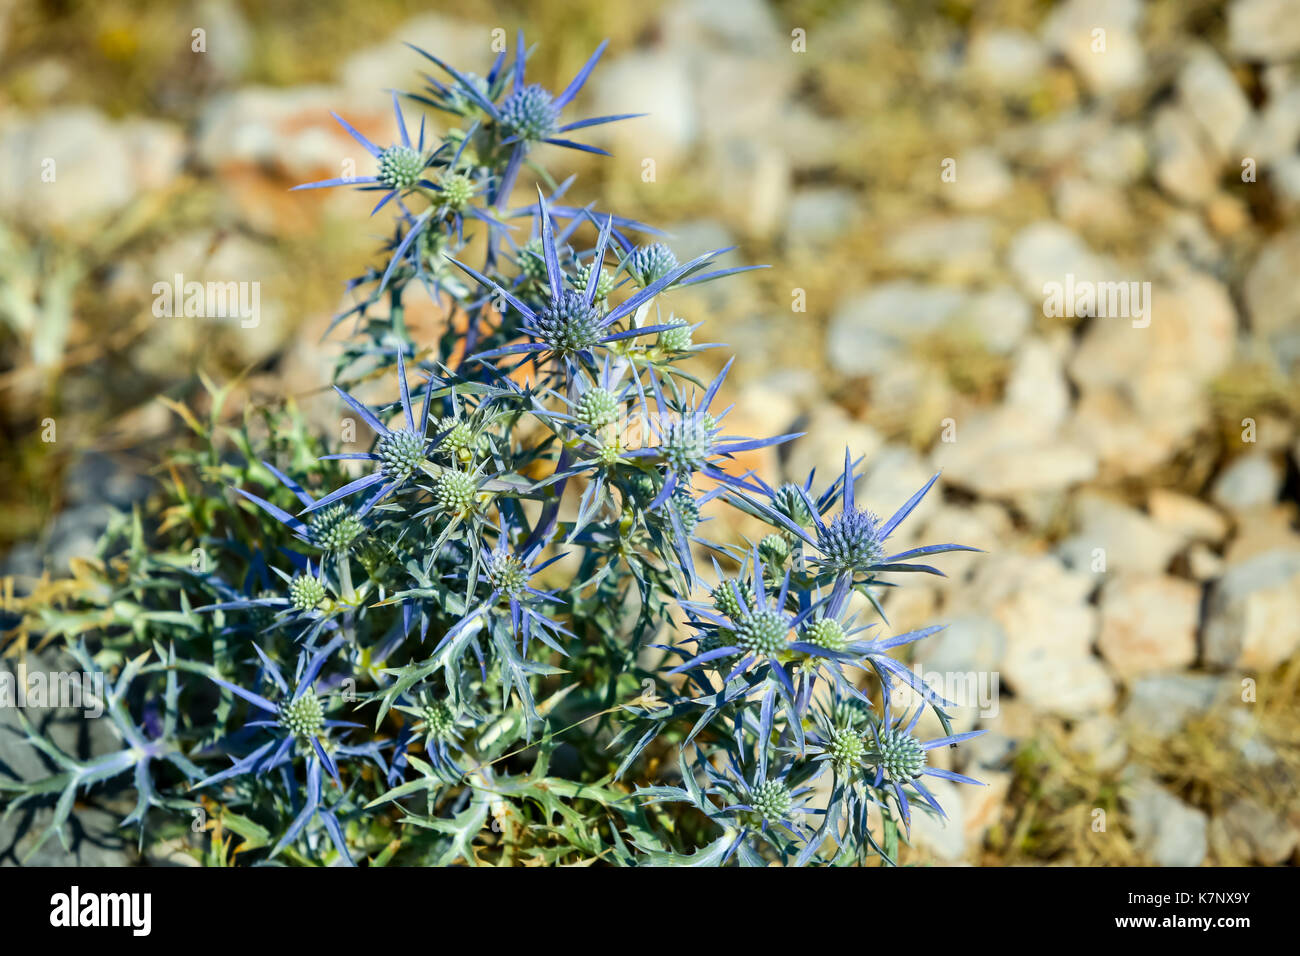 A close up of a Blue Sea Hollyflower on Srd hill in Dubrovnik, Croatia. Stock Photo